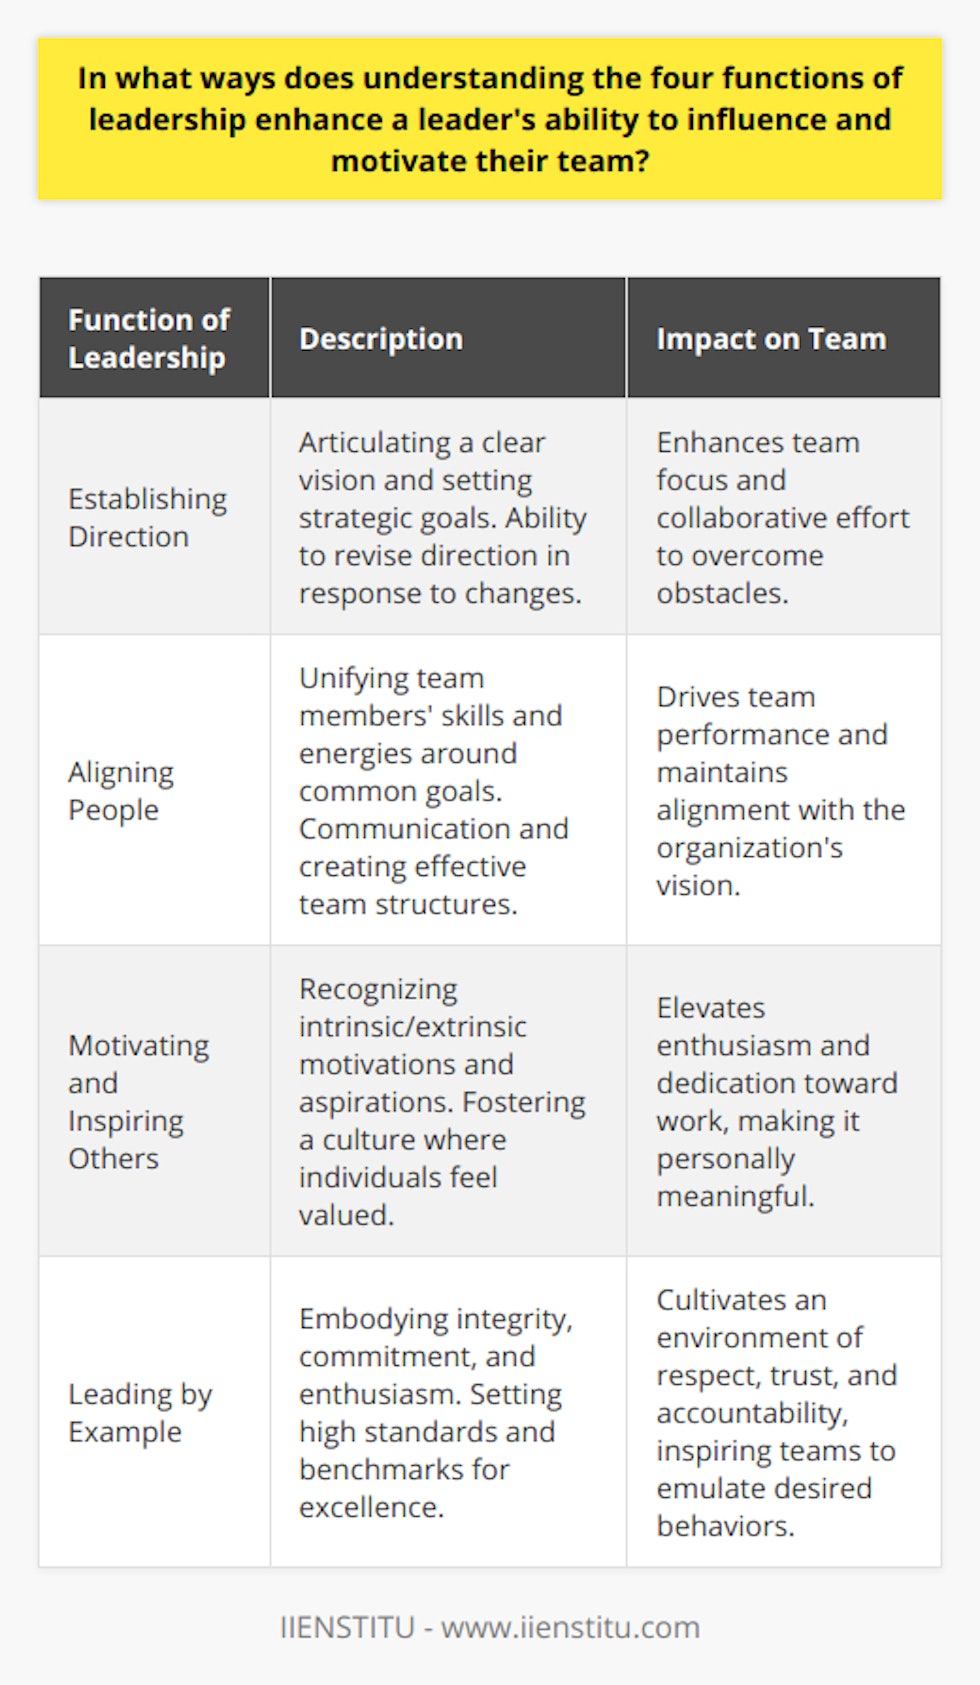 Leadership is a multifaceted discipline that requires a deep appreciation of its core functions to lead teams effectively. The four functions of leadership—establishing direction, aligning people, motivating and inspiring others, and leading by example—serve as pillars that uphold the structure of effective team management and empowerment.Establishing DirectionFormulating a clear vision and setting the strategic direction for a team form the foundation upon which all other leadership functions rest. Leaders who excel in this function articulate a coherent vision that resonates with the values and aspirations of their team members. By defining purpose and outlining the roadmap to success, leaders ensure that the entire team moves forward with a shared focus, making concerted efforts to overcome any potential obstacles. The capability to revise and refocus the team's direction in response to changing circumstances is an invaluable leadership trait that ensures sustained progress and adaptability in a dynamic environment.Aligning PeopleAlignment is about orchestrating a harmonious effort toward collective goals. Leaders adept at this function bring individuals together—uniting their skills, talents, and energies—around a common purpose. Aligning people requires transparent communication, establishment of effective team structures, and the creation of synergized roles where team members complement each other. Understanding how to merge diverse perspectives and channel them into a concerted effort is critical to driving the team's performance and keeping every individual aligned with the organization's vision.Motivating and Inspiring OthersThe ability to motivate and inspire lies at the heart of a leader's influence. Leaders who understand this function recognize the intrinsic and extrinsic factors that drive their team members. By tapping into individuals' motivations and aspirations, leaders can catalyze enthusiasm and dedication toward work. They can craft compelling narratives around the organization's goals, making the work personally meaningful for team members. These leaders not only provide tangible rewards but also nourish their team's intrinsic motivation by fostering a culture where individuals feel valued, challenged, and integral to the success of the enterprise.Leading by ExampleLastly, a keen understanding of the impact of leading by example underscores the credibility of leadership. Leaders who personify the qualities they wish to see in their team members—they exhibit integrity, commitment, and enthusiasm—inspire their teams to emulate these behaviors. By setting high standards for themselves, leaders establish a benchmark for excellence within the organization. This function is pivotal in cultivating an environment where mutual respect, trust, and accountability flourish, enabling the team to excel in its endeavors.In evaluating the aspects of leadership discussed above, a leader equipped with an intricate understanding of these functions can adeptly navigate the challenges of team management. They are better positioned to foster a culture of performance, accountability, and unity, ultimately guiding their team to tangible success. Leaders who commit themselves to constant learning and application of these core functions not only influence and motivate with more finesse but also leave a lasting impact that echoes throughout the organization's future.